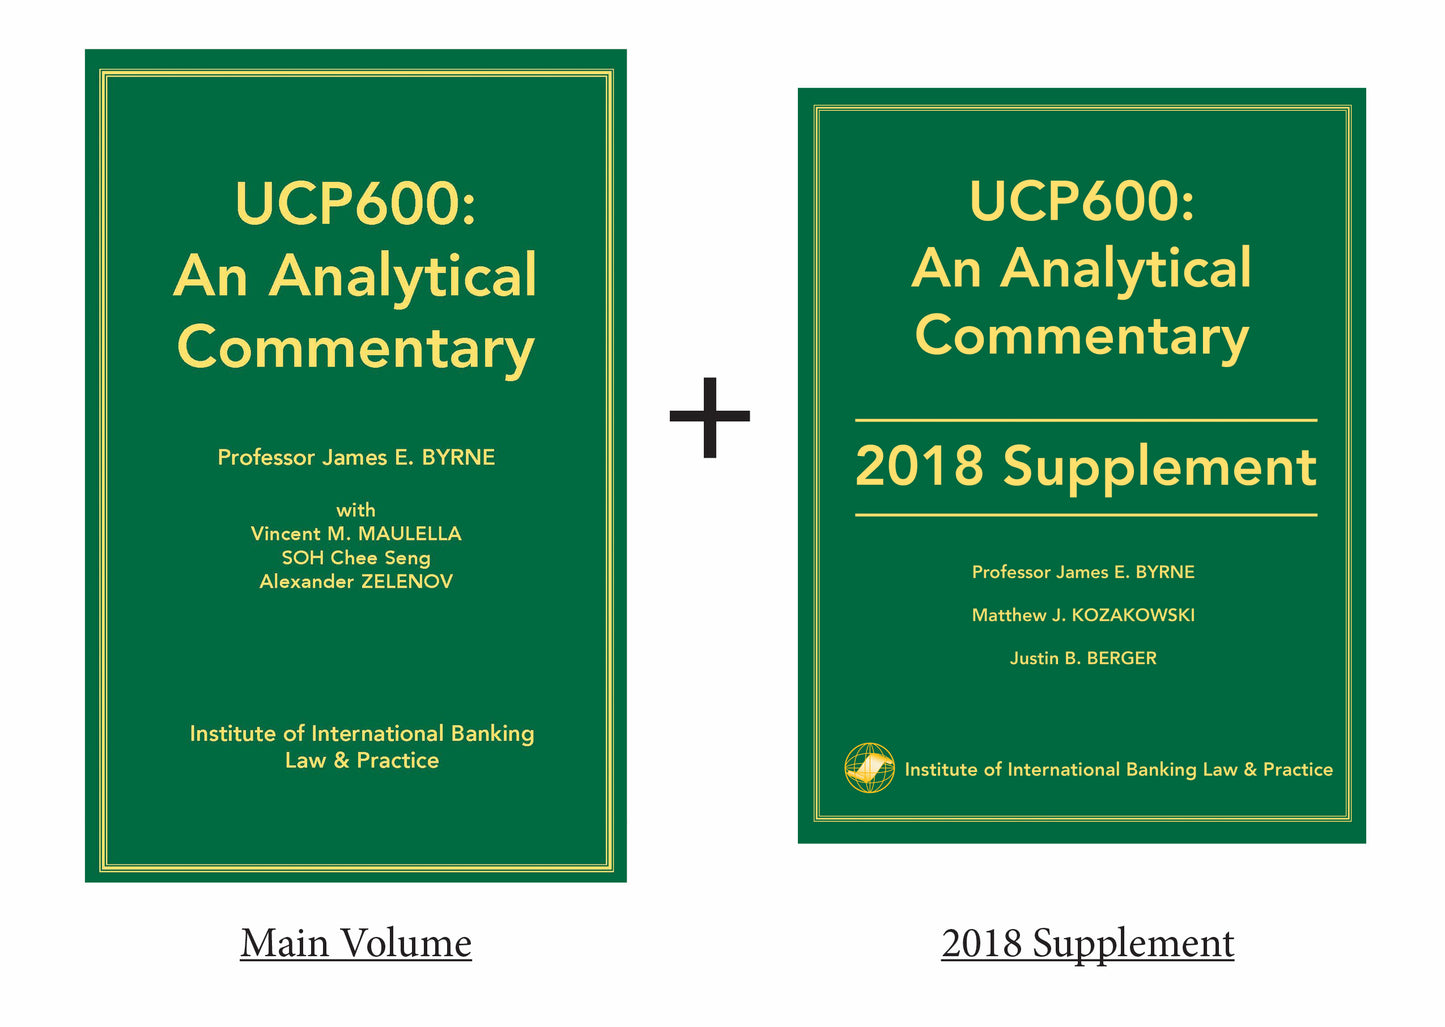 UCP600: An Analytical Commentary